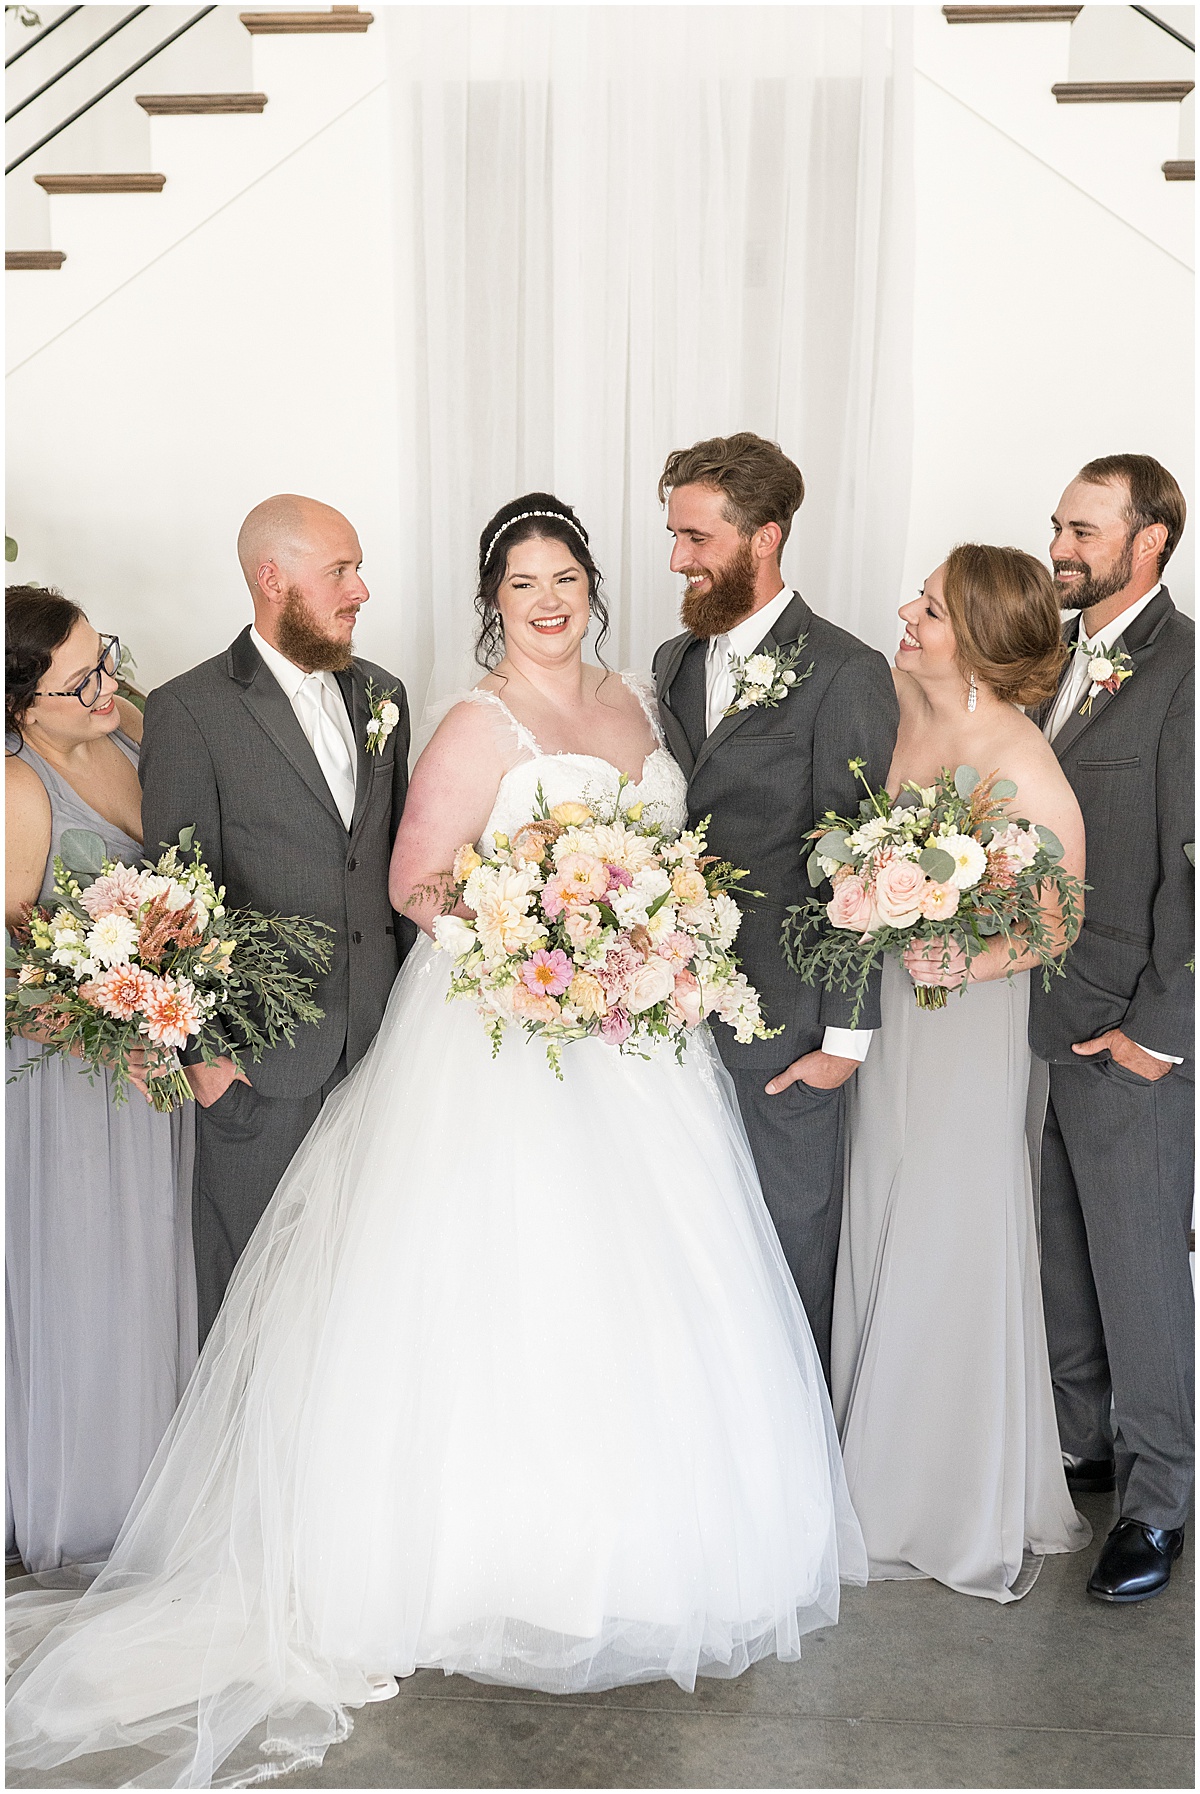 Bridal party looks at bride during pastel wedding at New Journey Farms in Lafayette, Indiana